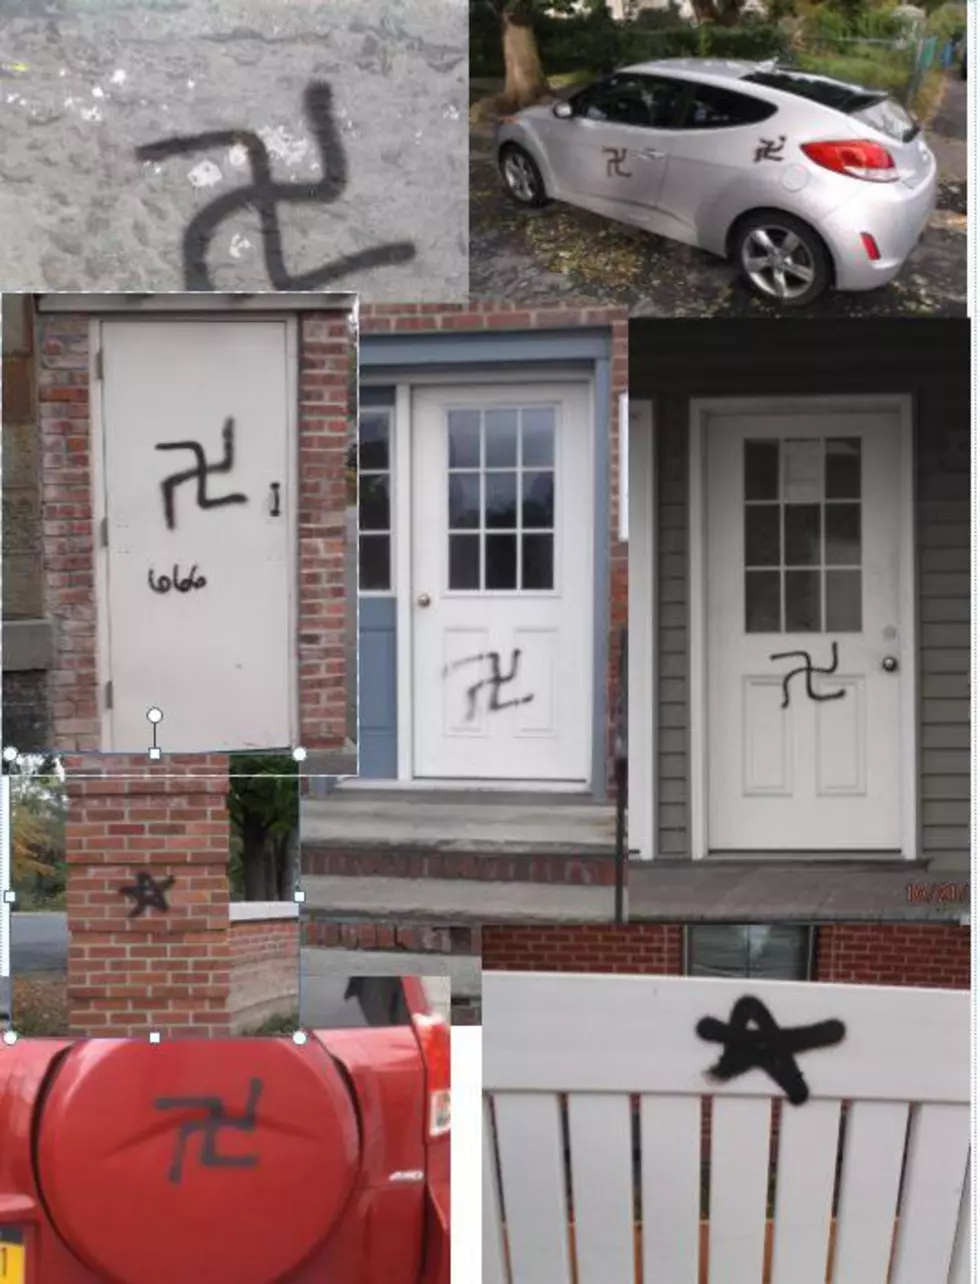 4 Children Accused of Drawing Multiple Swastikas in Hudson Valley